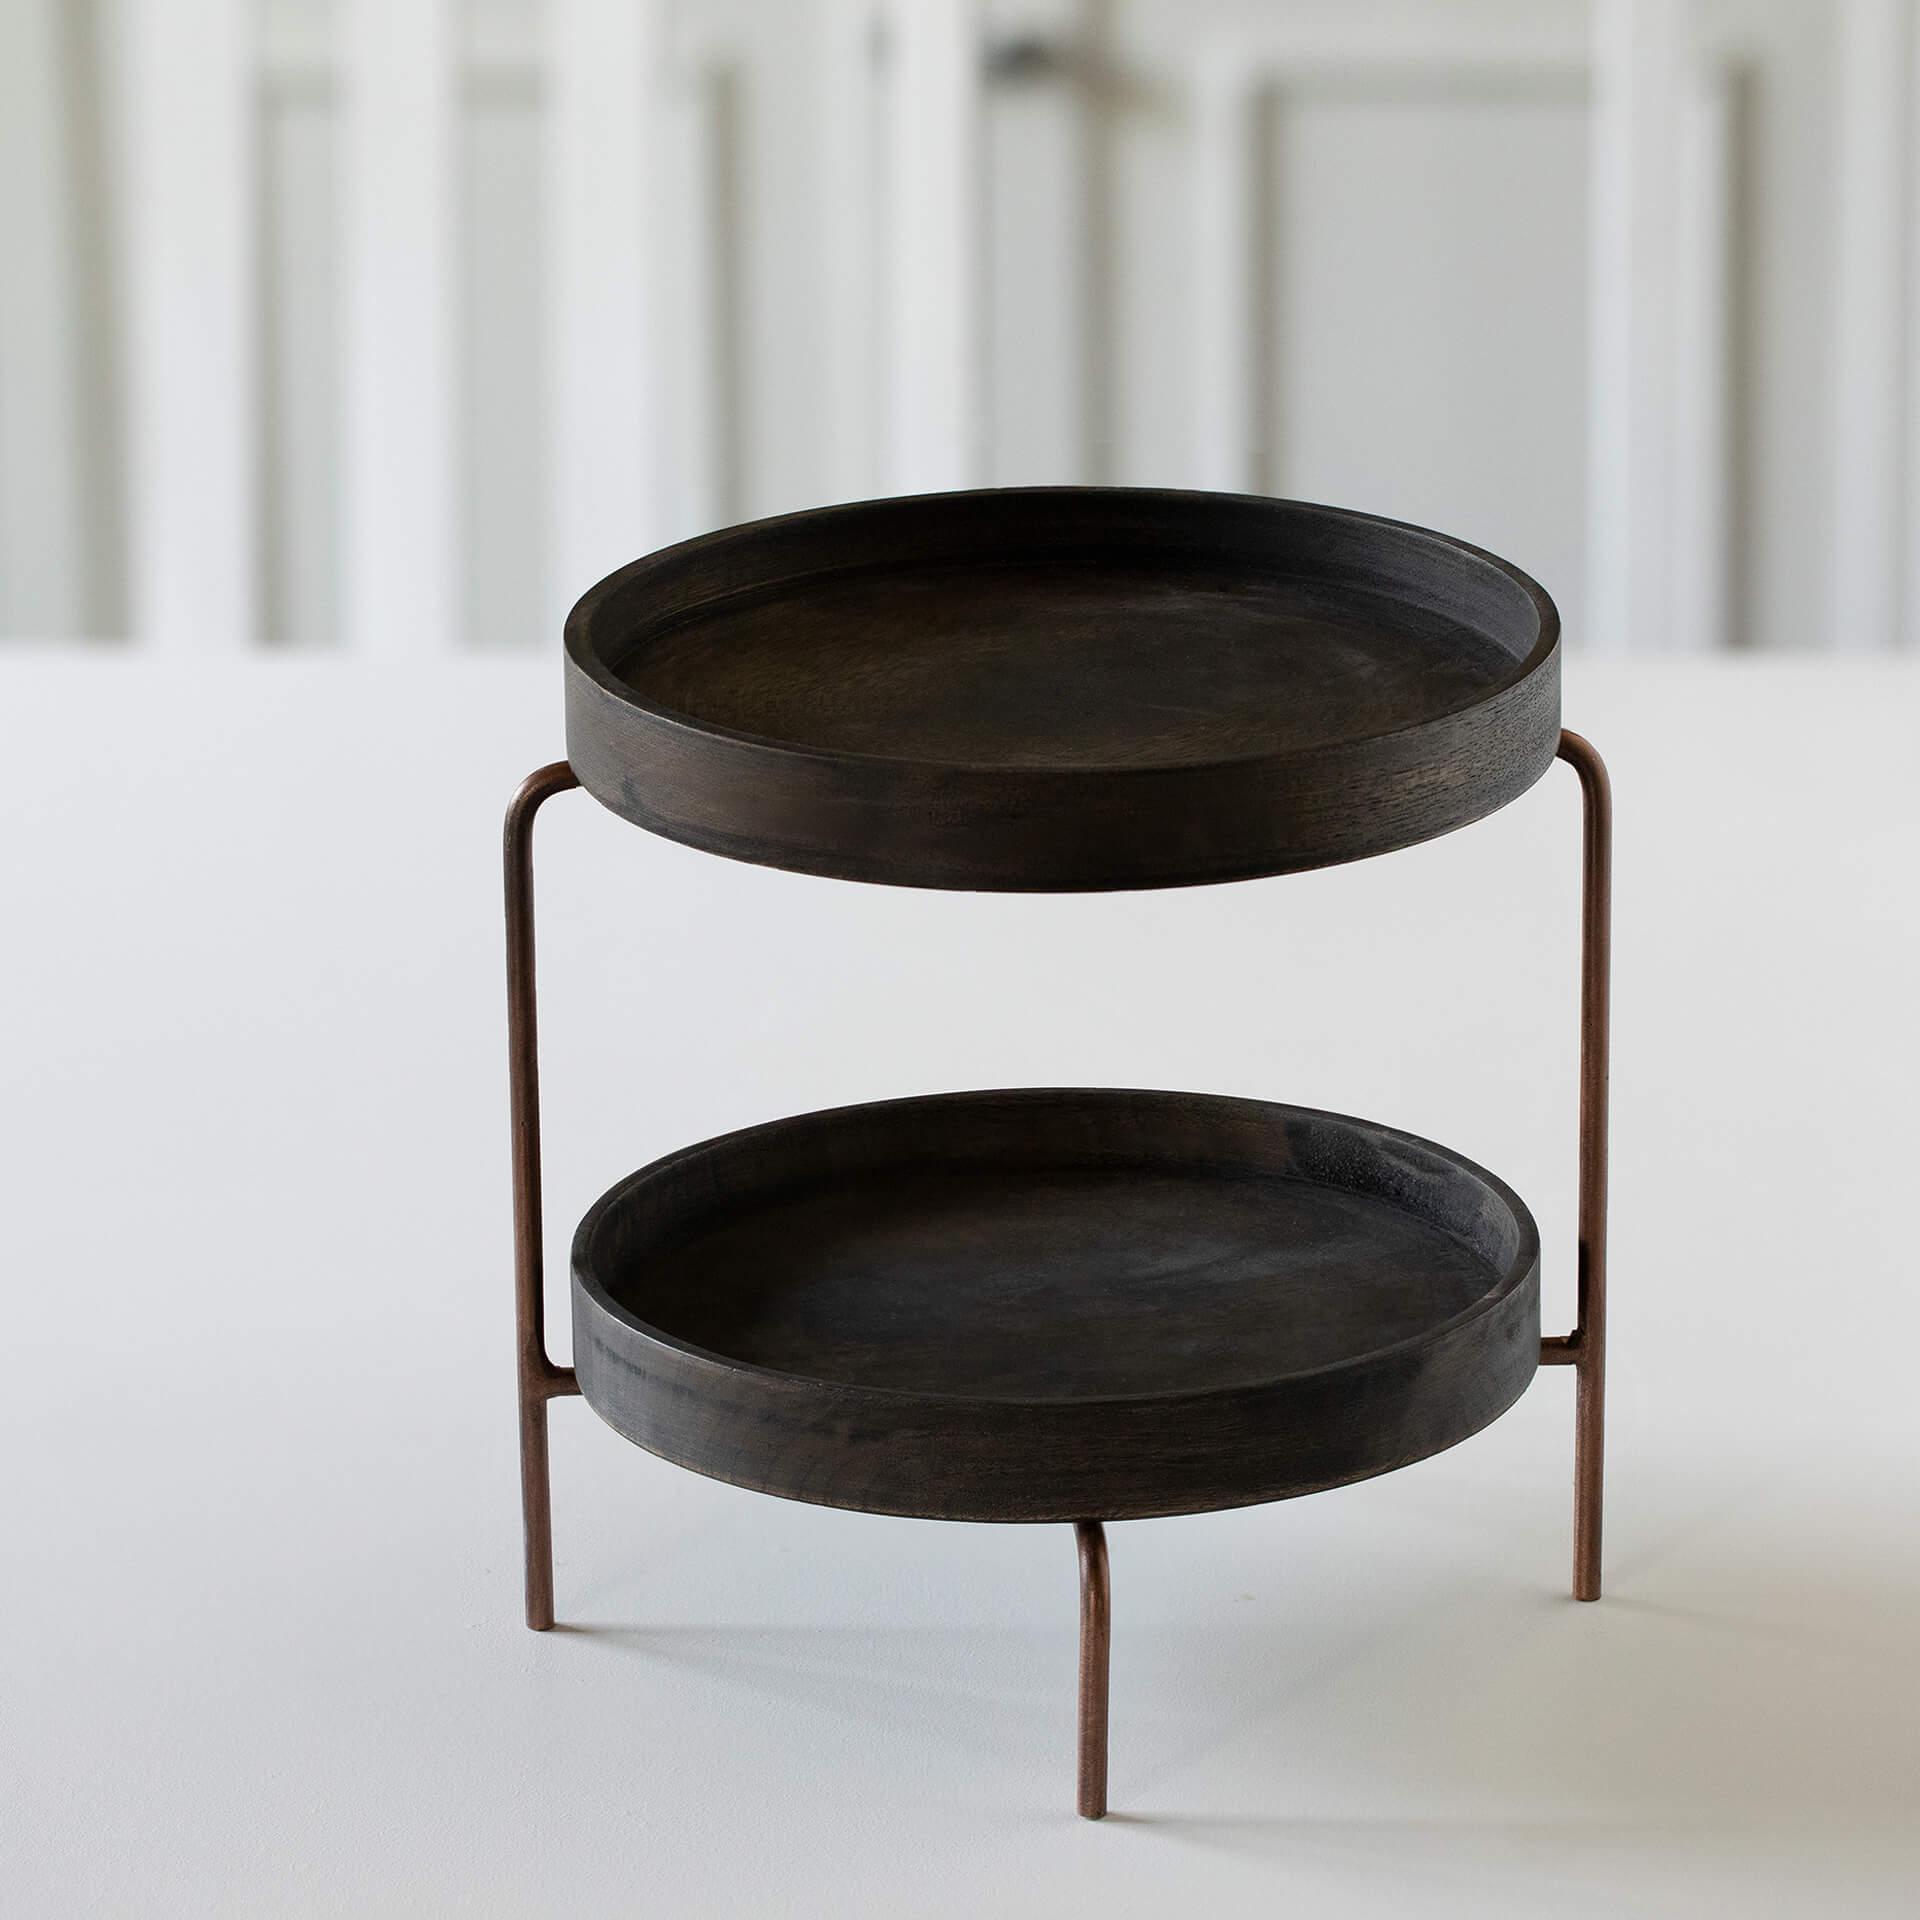 mango wood brown 2 tier cake stand